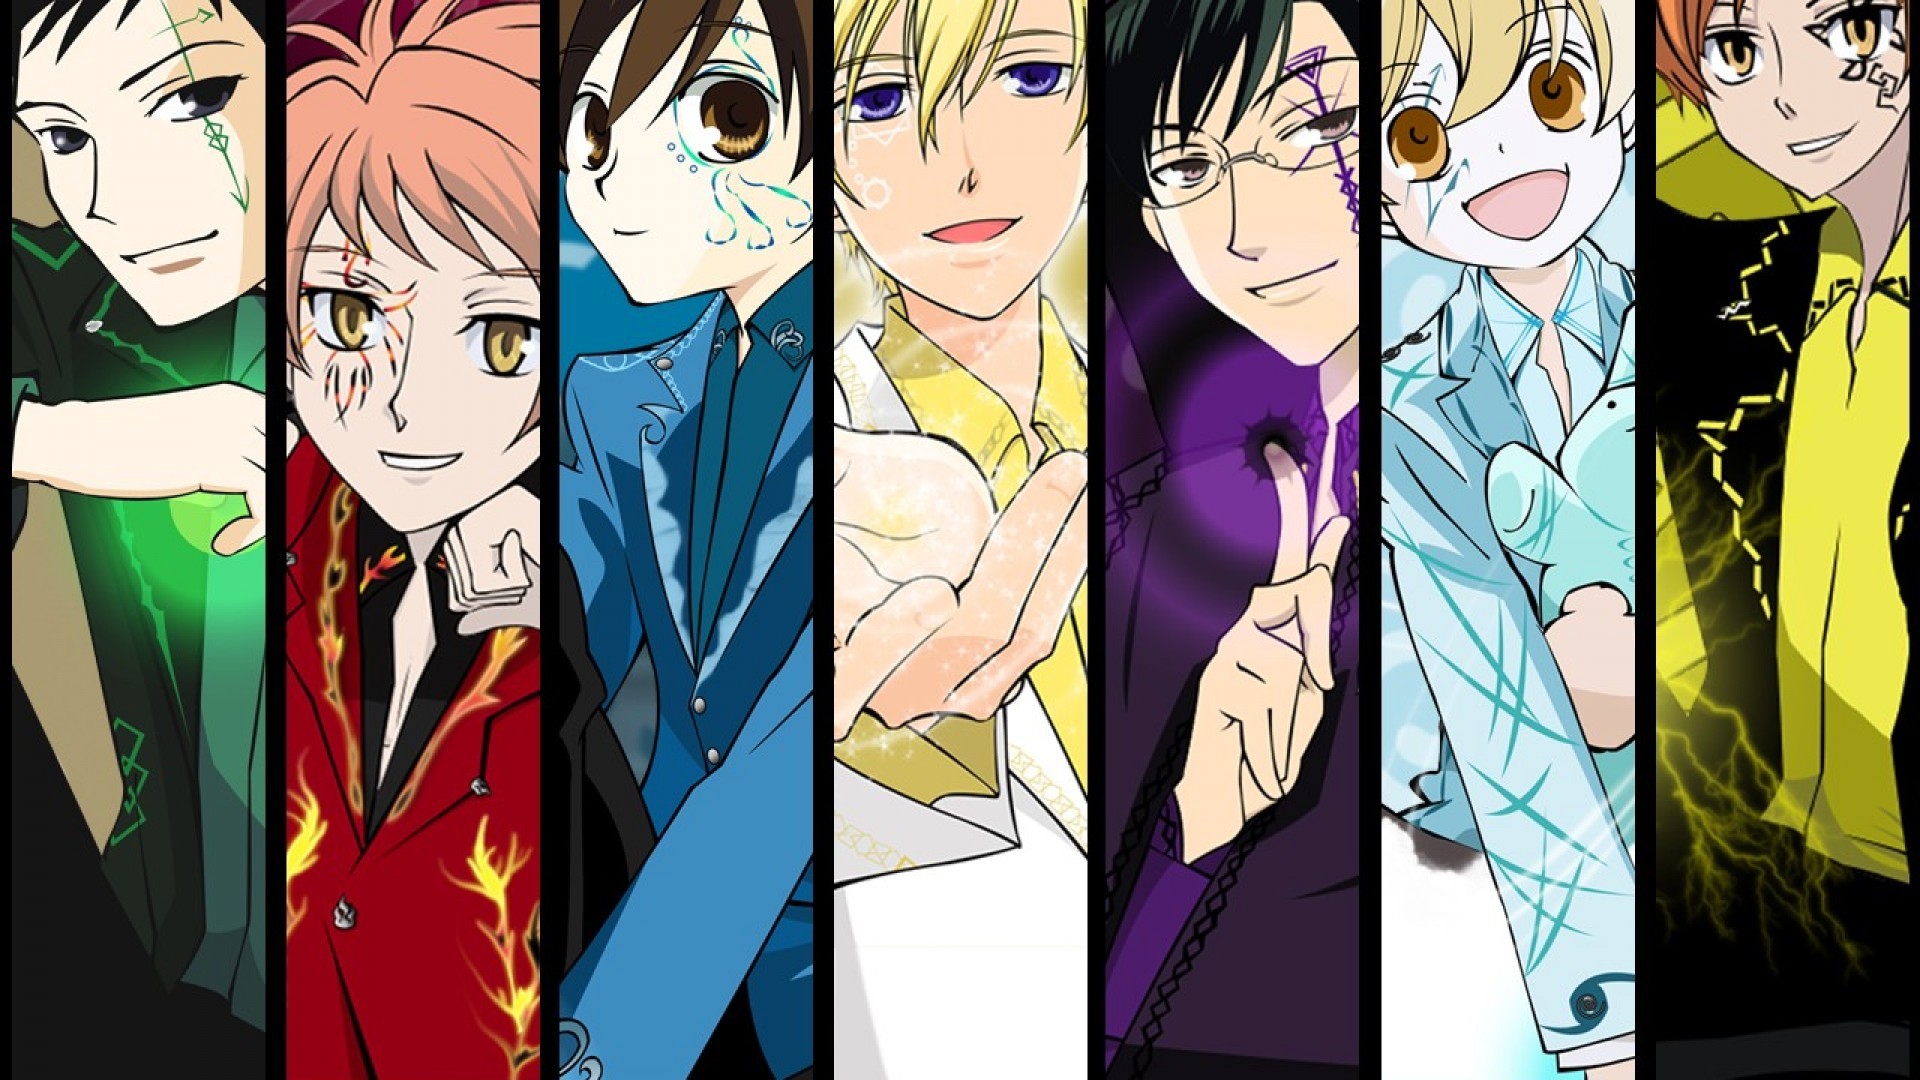 1920x1080 1024x768 Ouran High School Host Club images Ouran HD wallpaper and  background ... 1024x768 ...